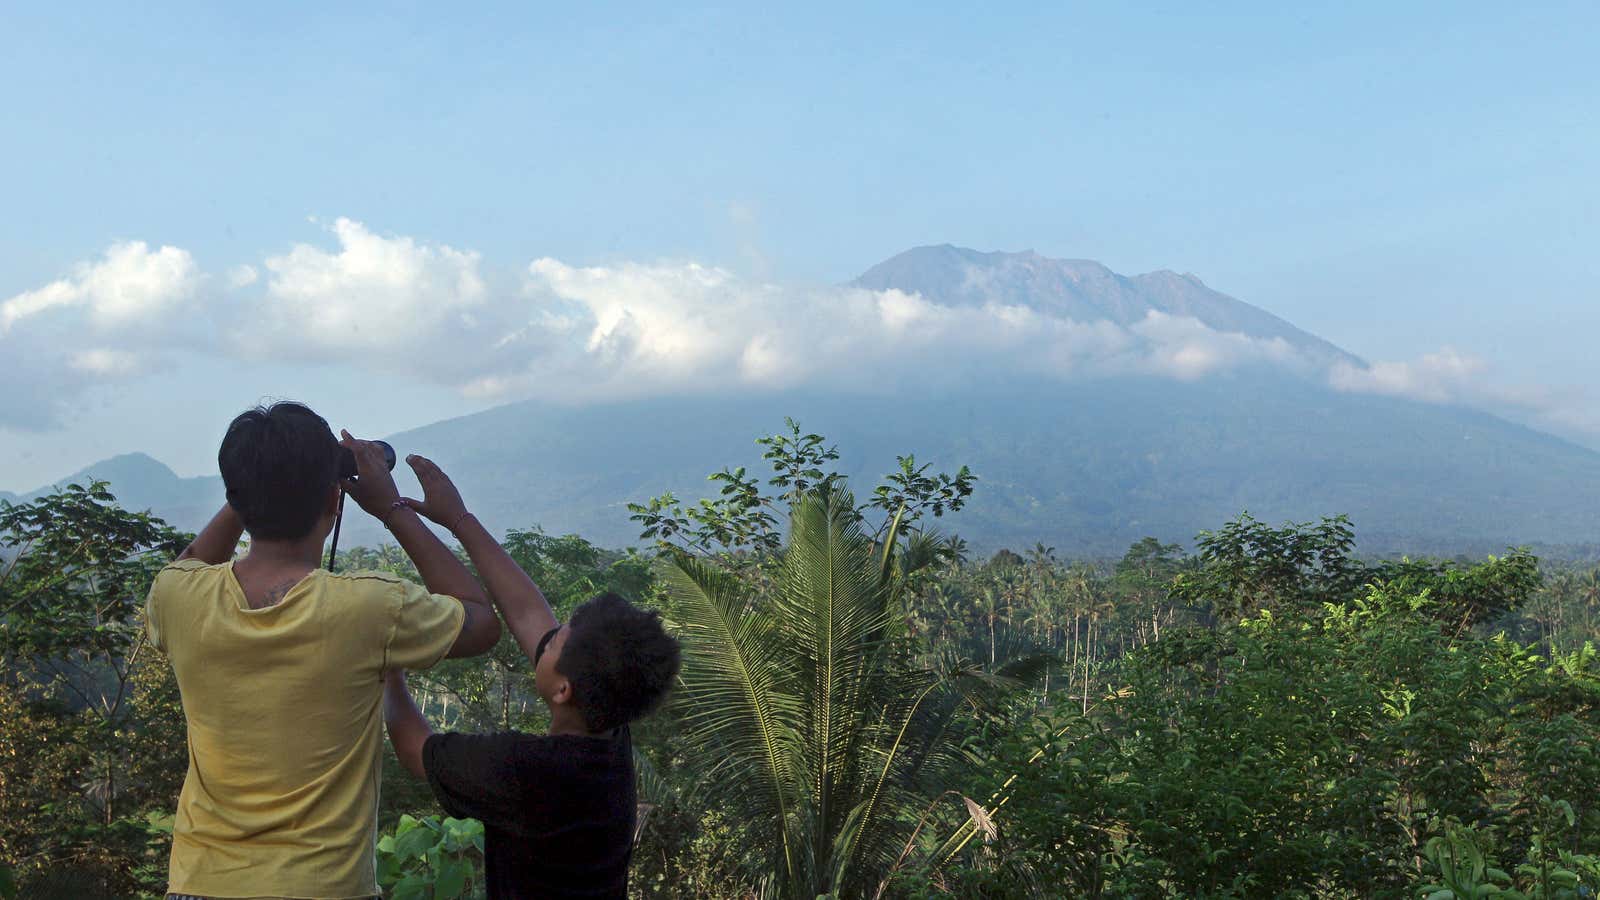 A man observes the Mount Agung with binoculars at a viewing point in Bali, Indonesia, Wednesday, Sept. 20, 2017. Officials have more than doubled the size of evacuation zone around the Mount Agung volcano o the tourist island of Bali and raised its alert level for the second time in less than a week. (AP Photo/Firdia Lisnawati)